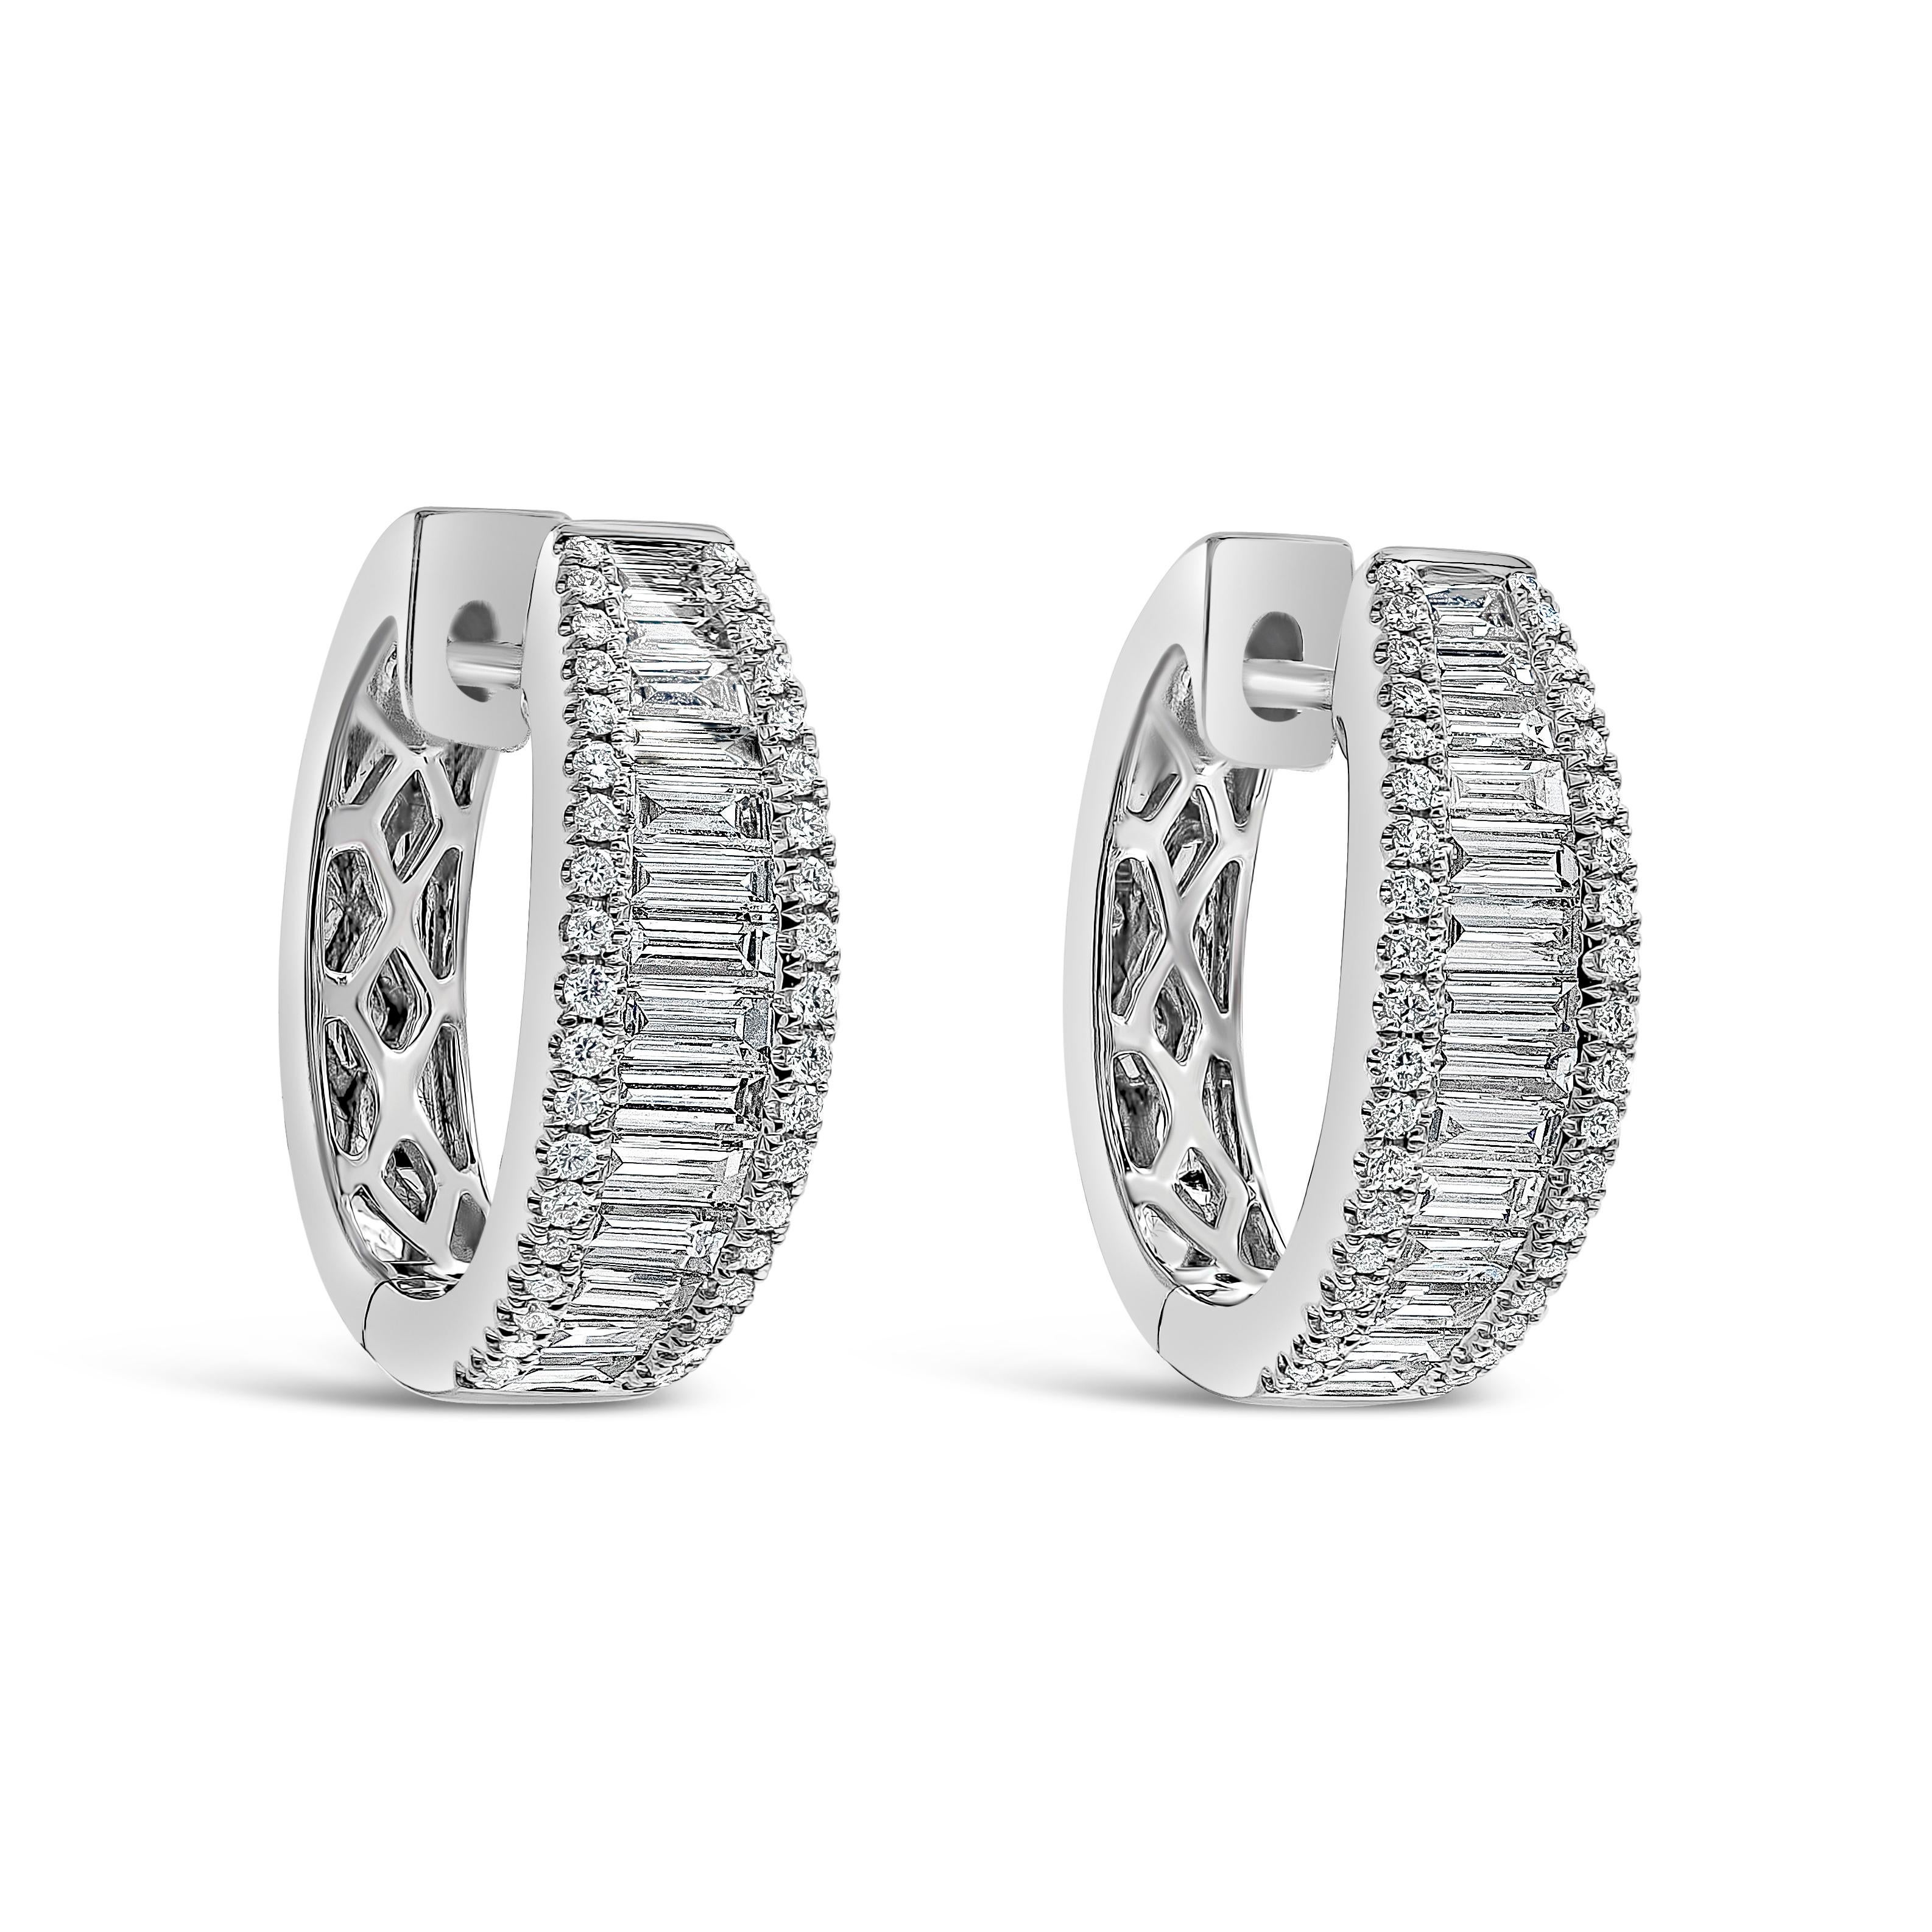 Showcasing step-cut baguette diamonds that graduate in size and channel set in a diamond-encrusted mounting made in 18k white gold. Baguette diamonds weigh 0.97 carats total; round diamonds weigh 0.23 carats total.

Style available in different